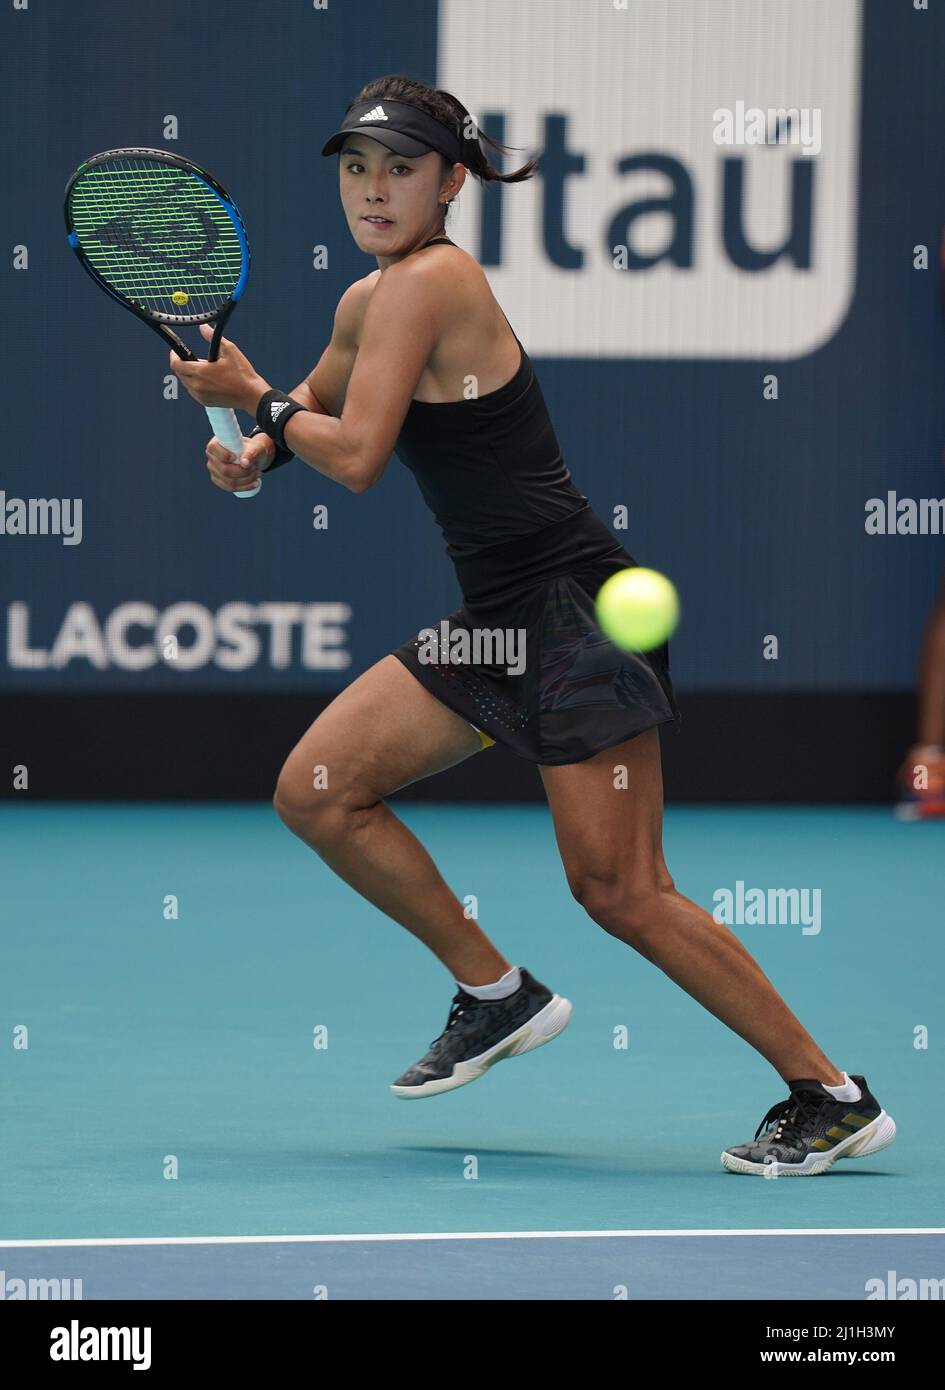 Miami Gardens FL, USA. 25th Mar, 2022. Coco Gauff Vs Wang Qiang during The Miami Open at Hard Rock Stadium on March 25, 2022 in Miami Gardens, Florida. Credit: Mpi04/Media Punch/Alamy Live News Stock Photo